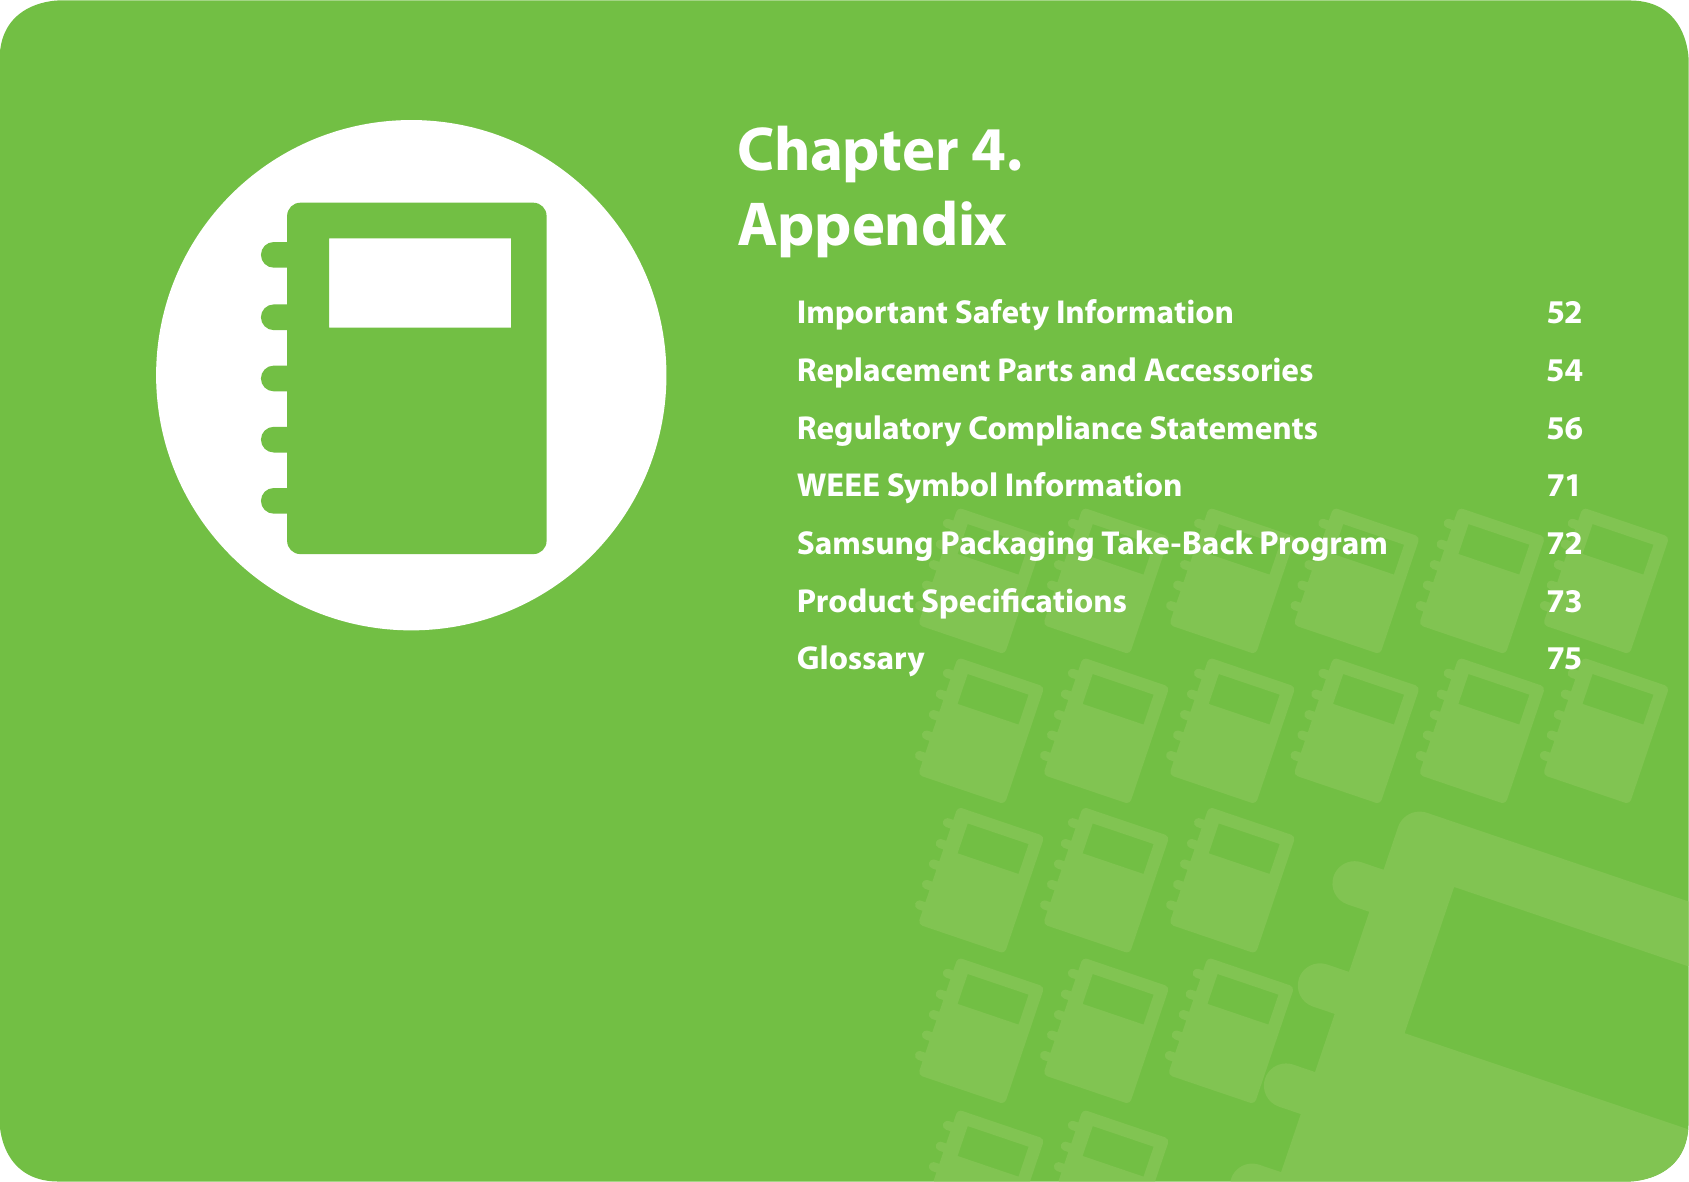  Chapter  4. AppendixImportant Safety Information  52Replacement Parts and Accessories  54Regulatory Compliance Statements  56WEEE Symbol Information  71Samsung Packaging Take-Back Program  72Product Speci cations  73Glossary 75